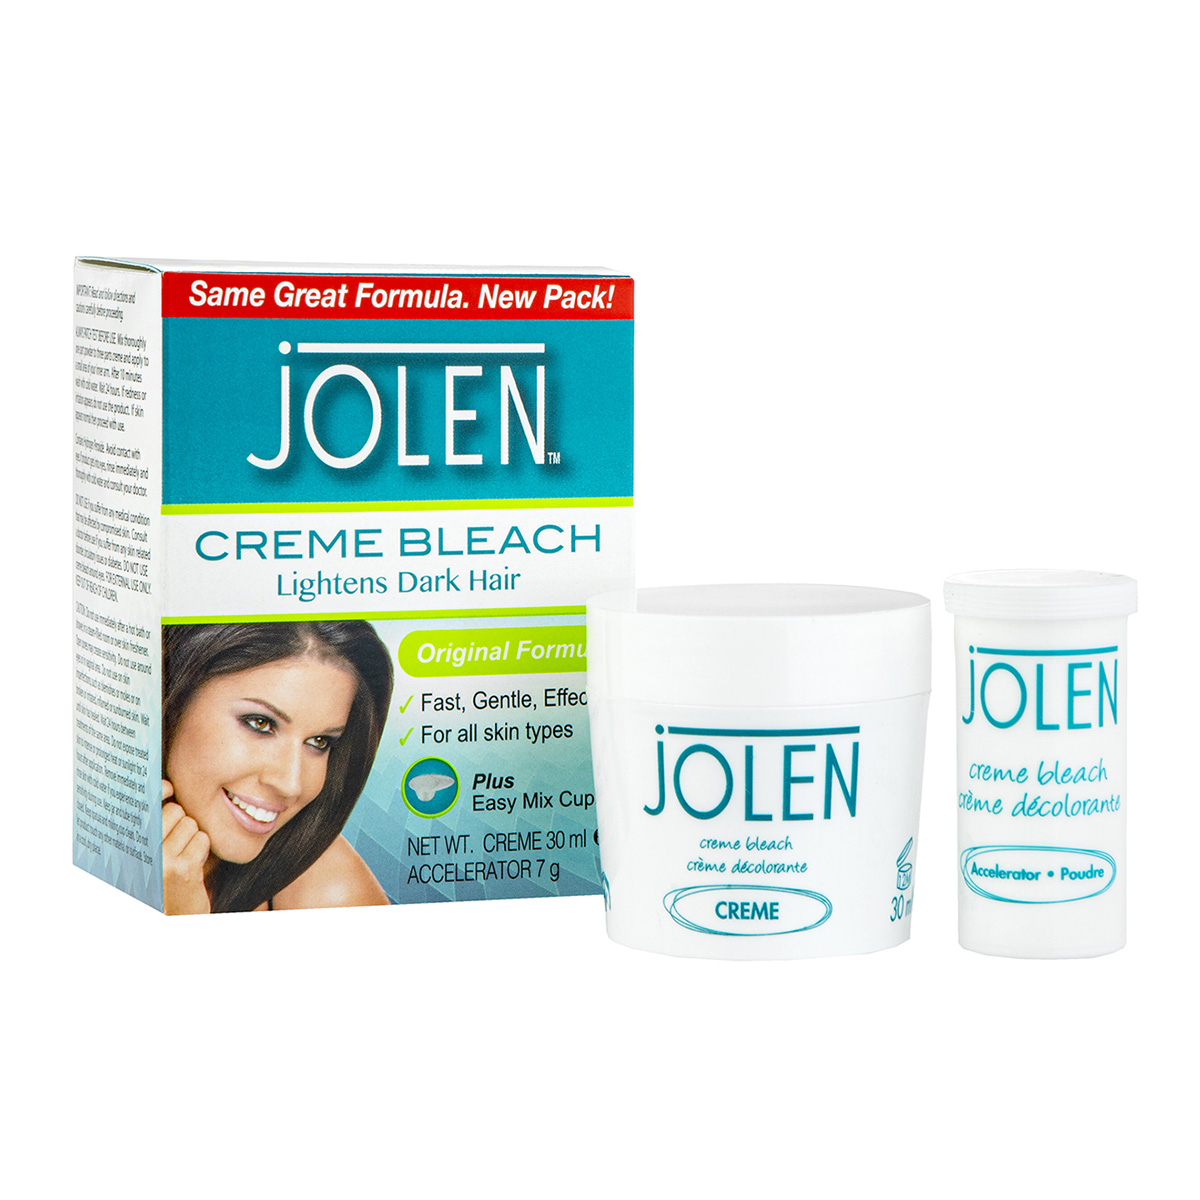 Buy for € from Beautybuys Ireland - Jolen Bleach effectively lightens  dark hair on the face, arms, body, and brow. This product compromises a  cream and powder which when mixed together lighten